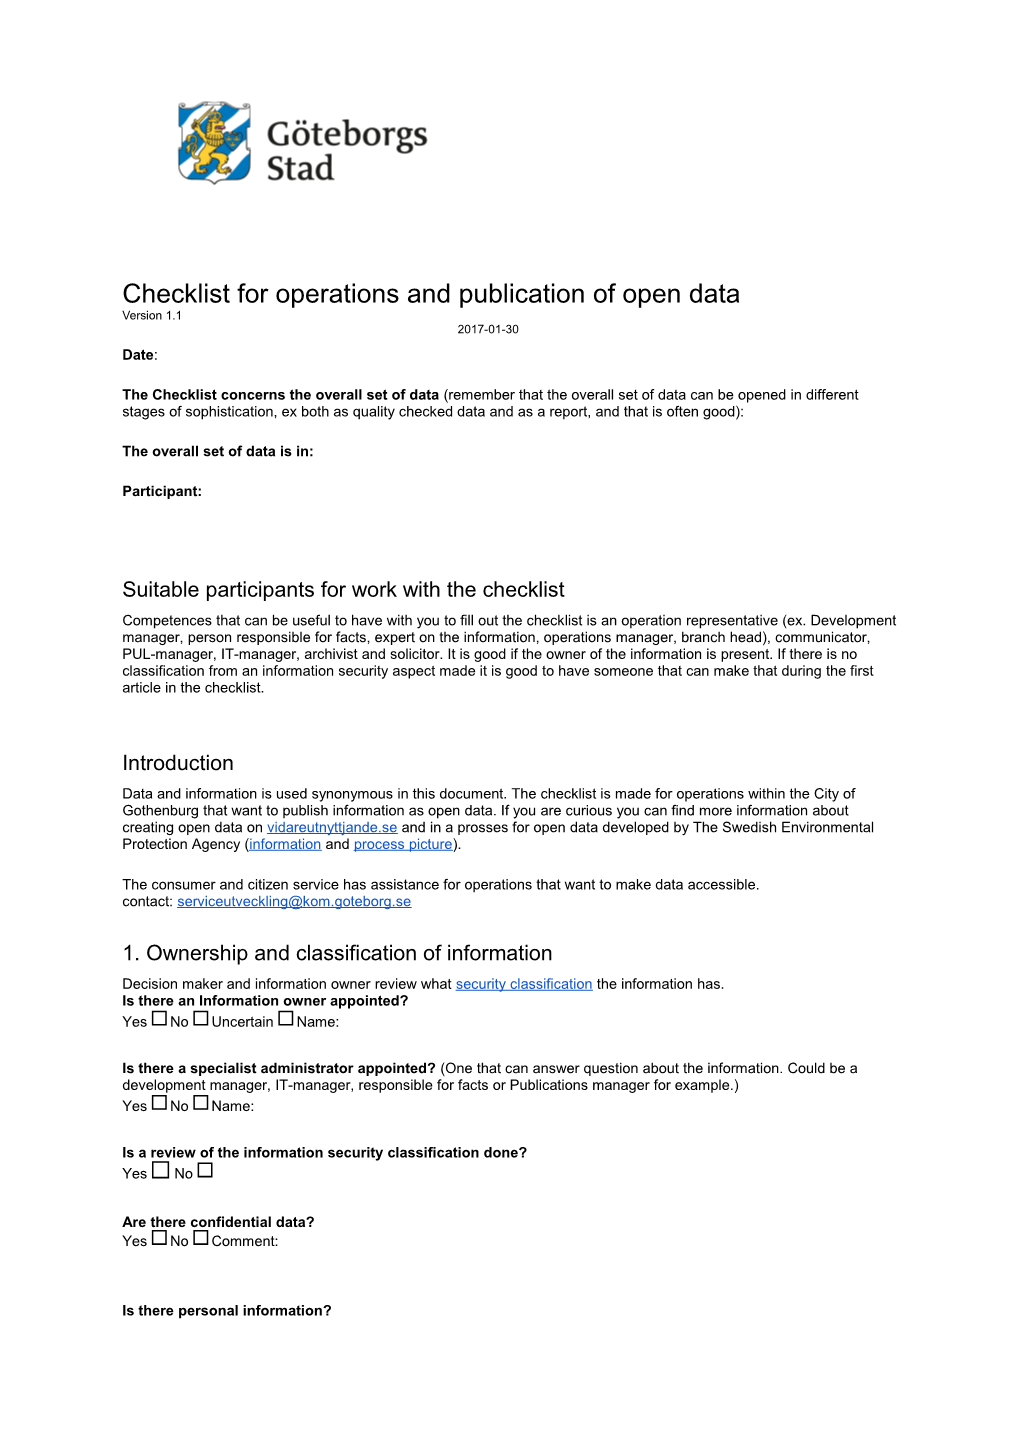 Checklist for Operations and Publication of Open Data